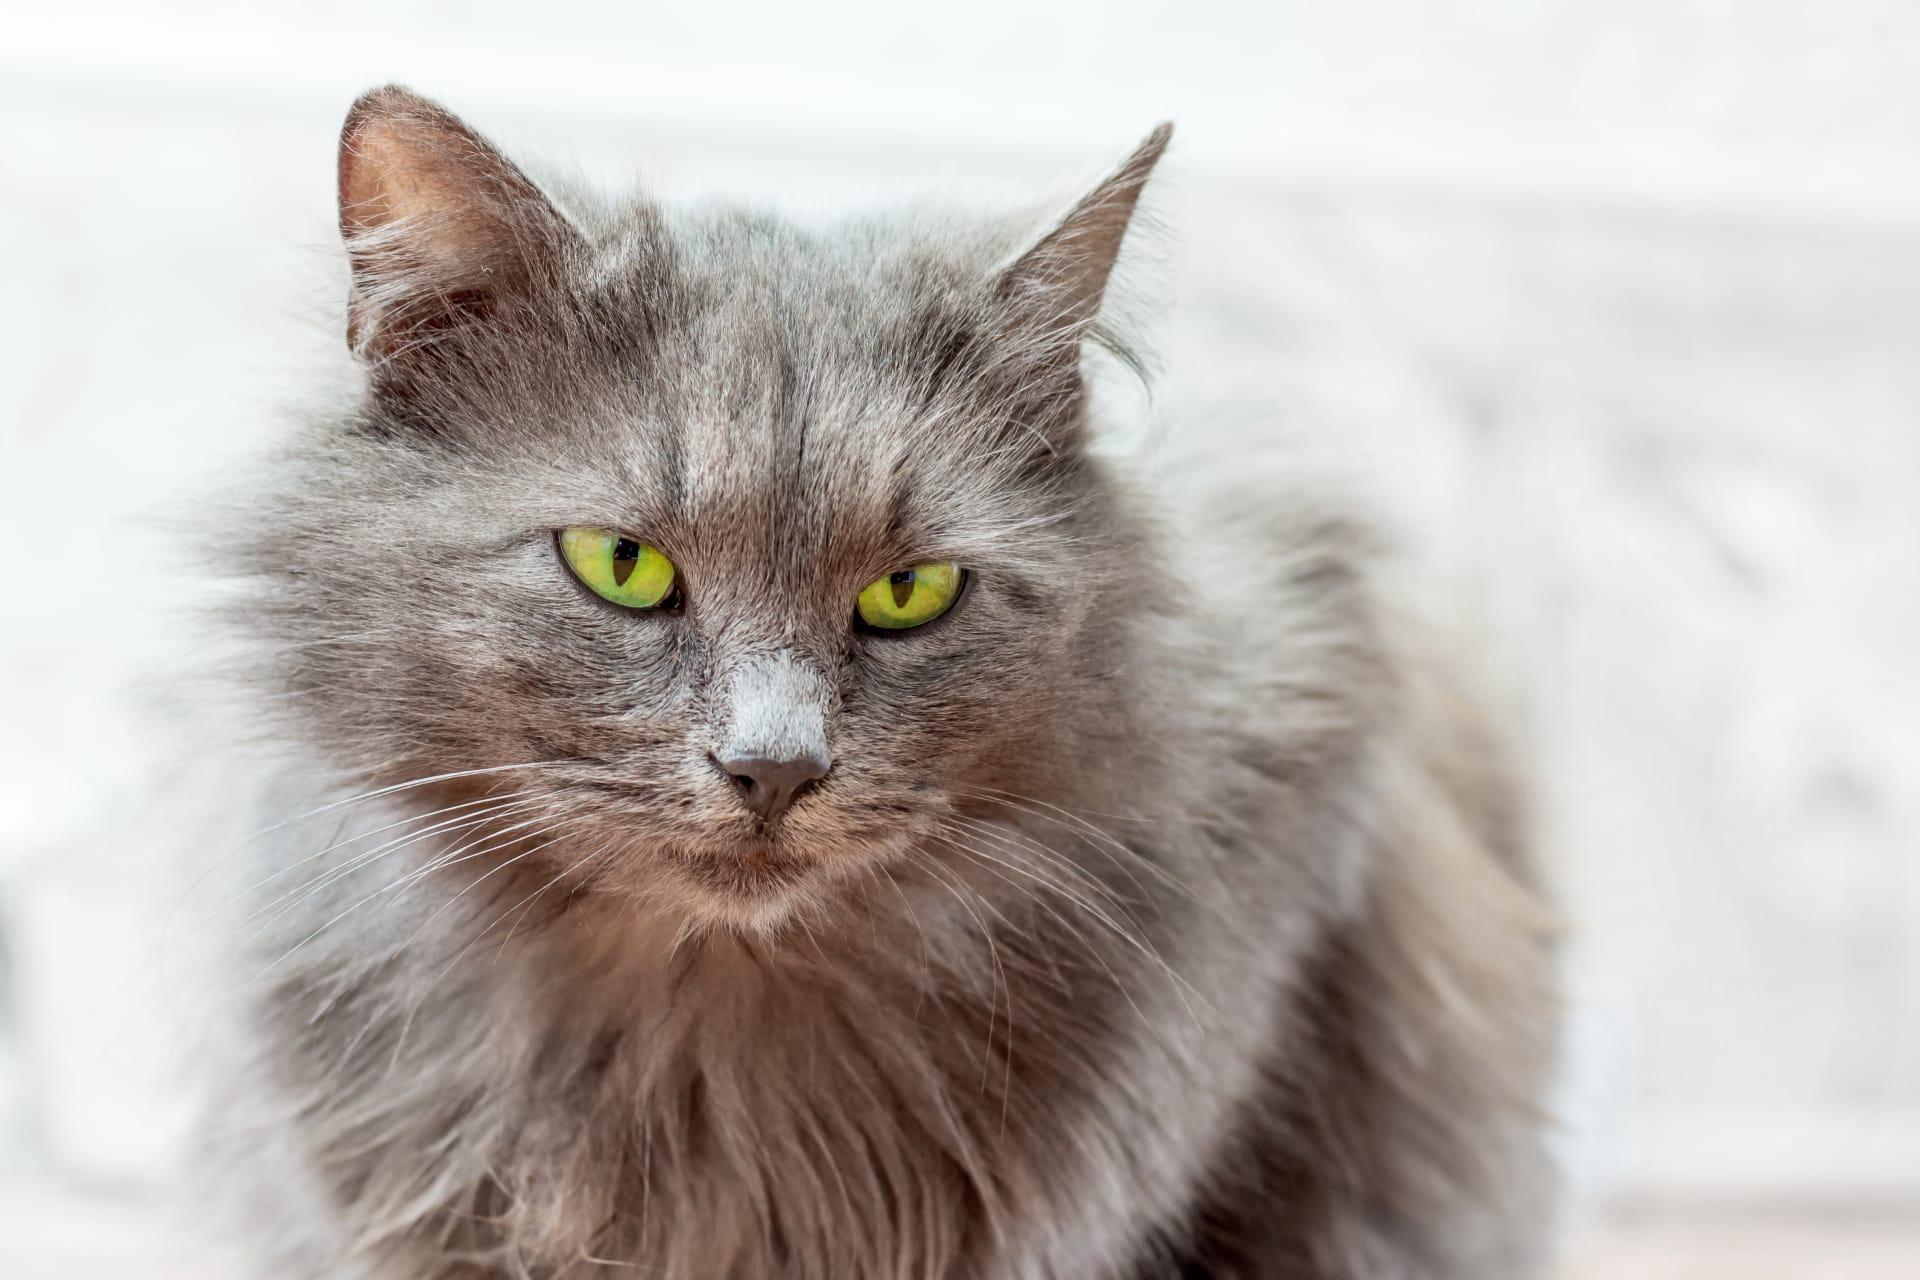 Nebelung cat pictures